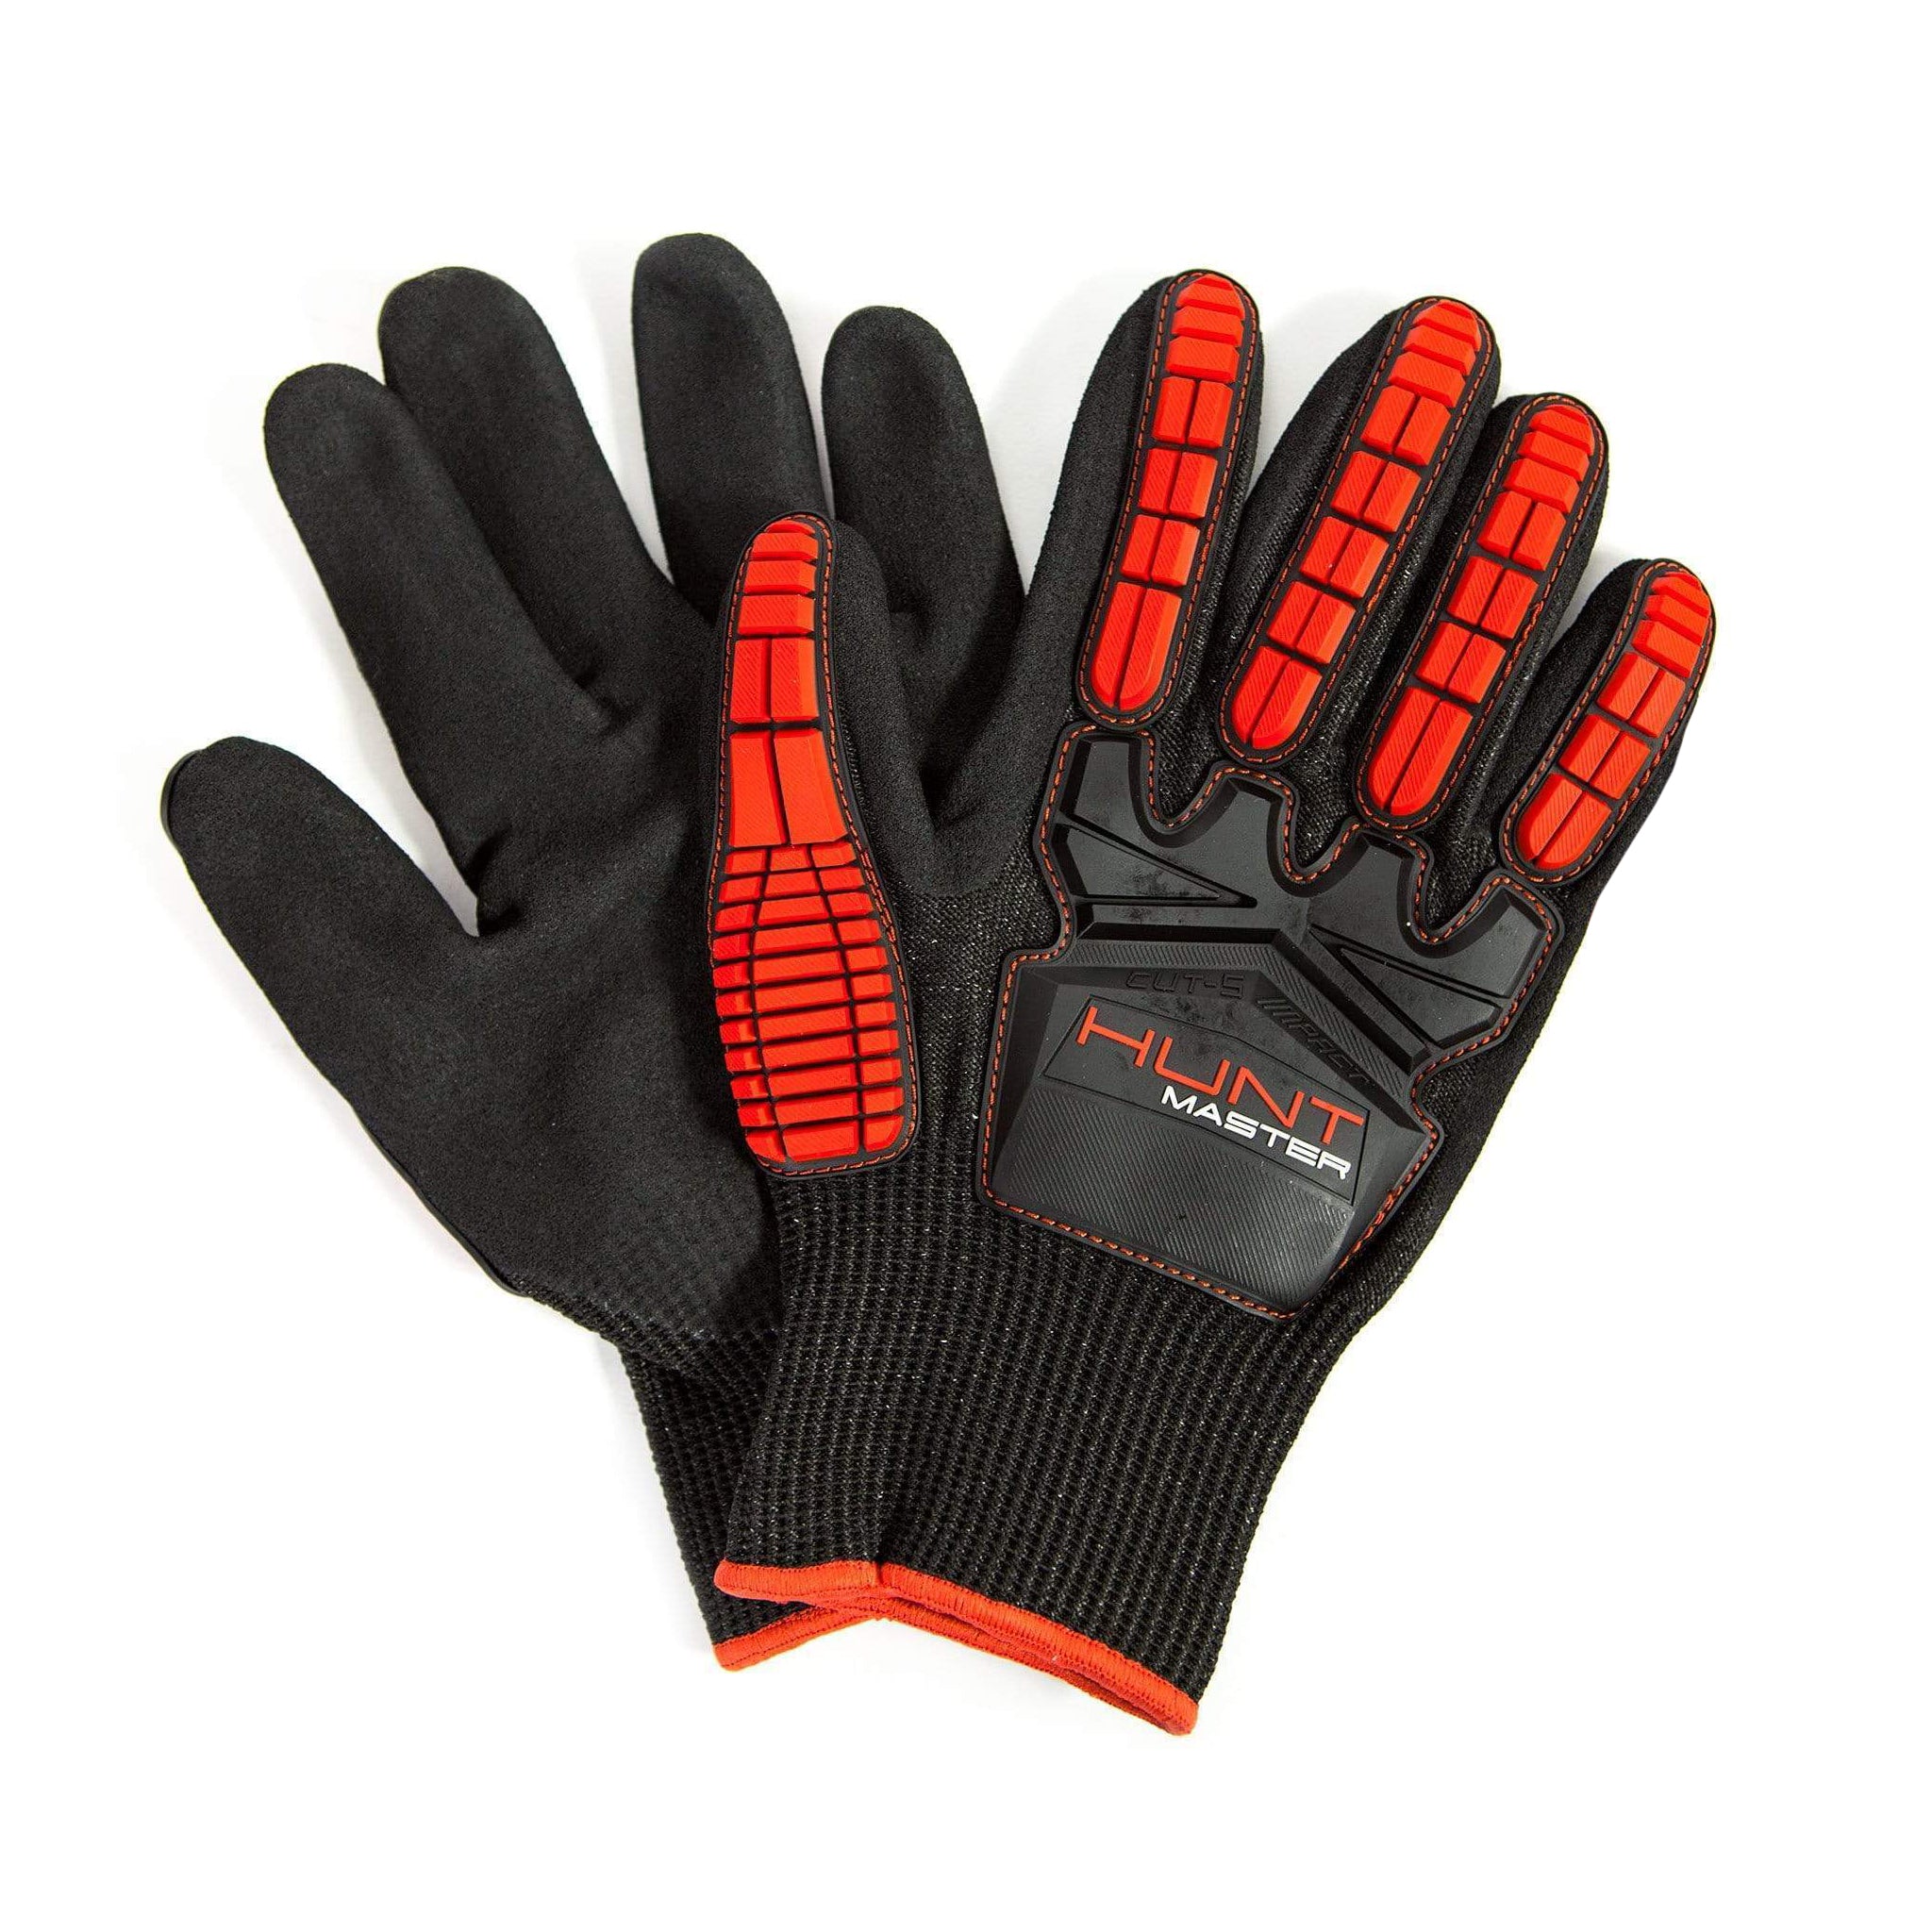 GAUNTLET Diving Gloves - Anti Cut Protection